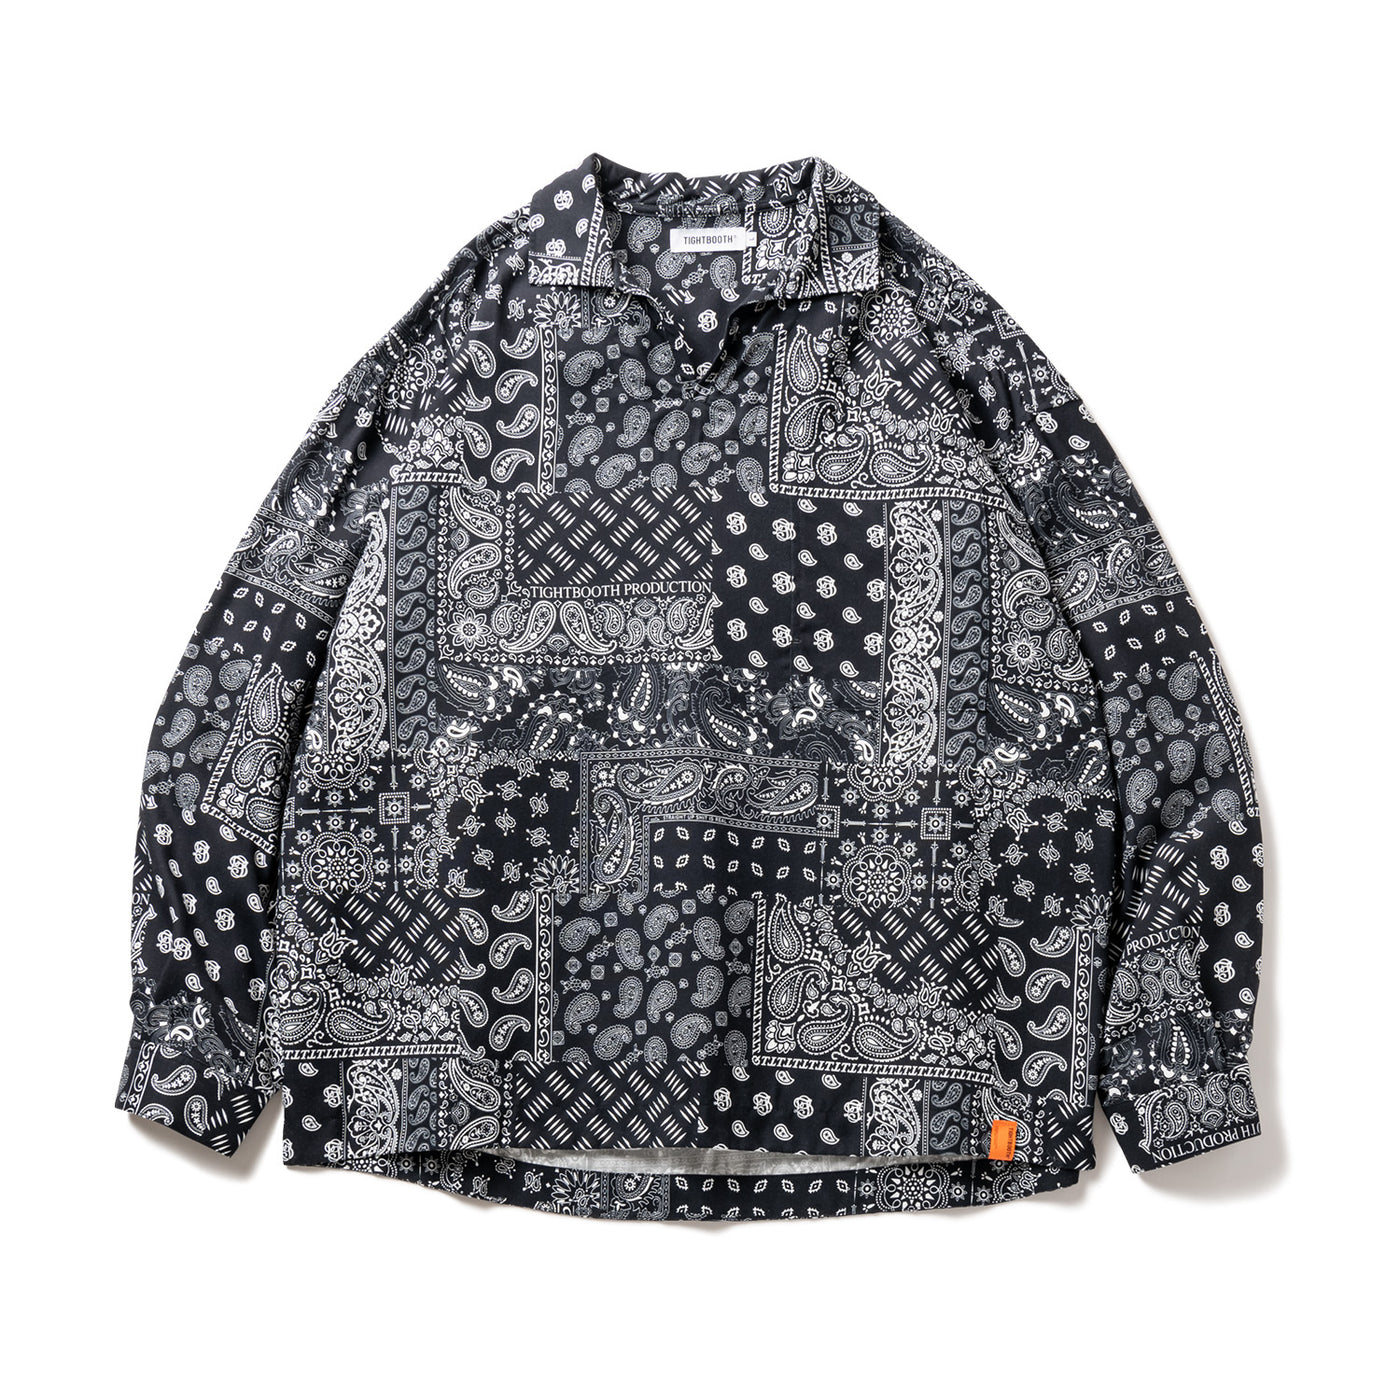 PAISLEY L/S OPEN SHIRT - TIGHTBOOTH